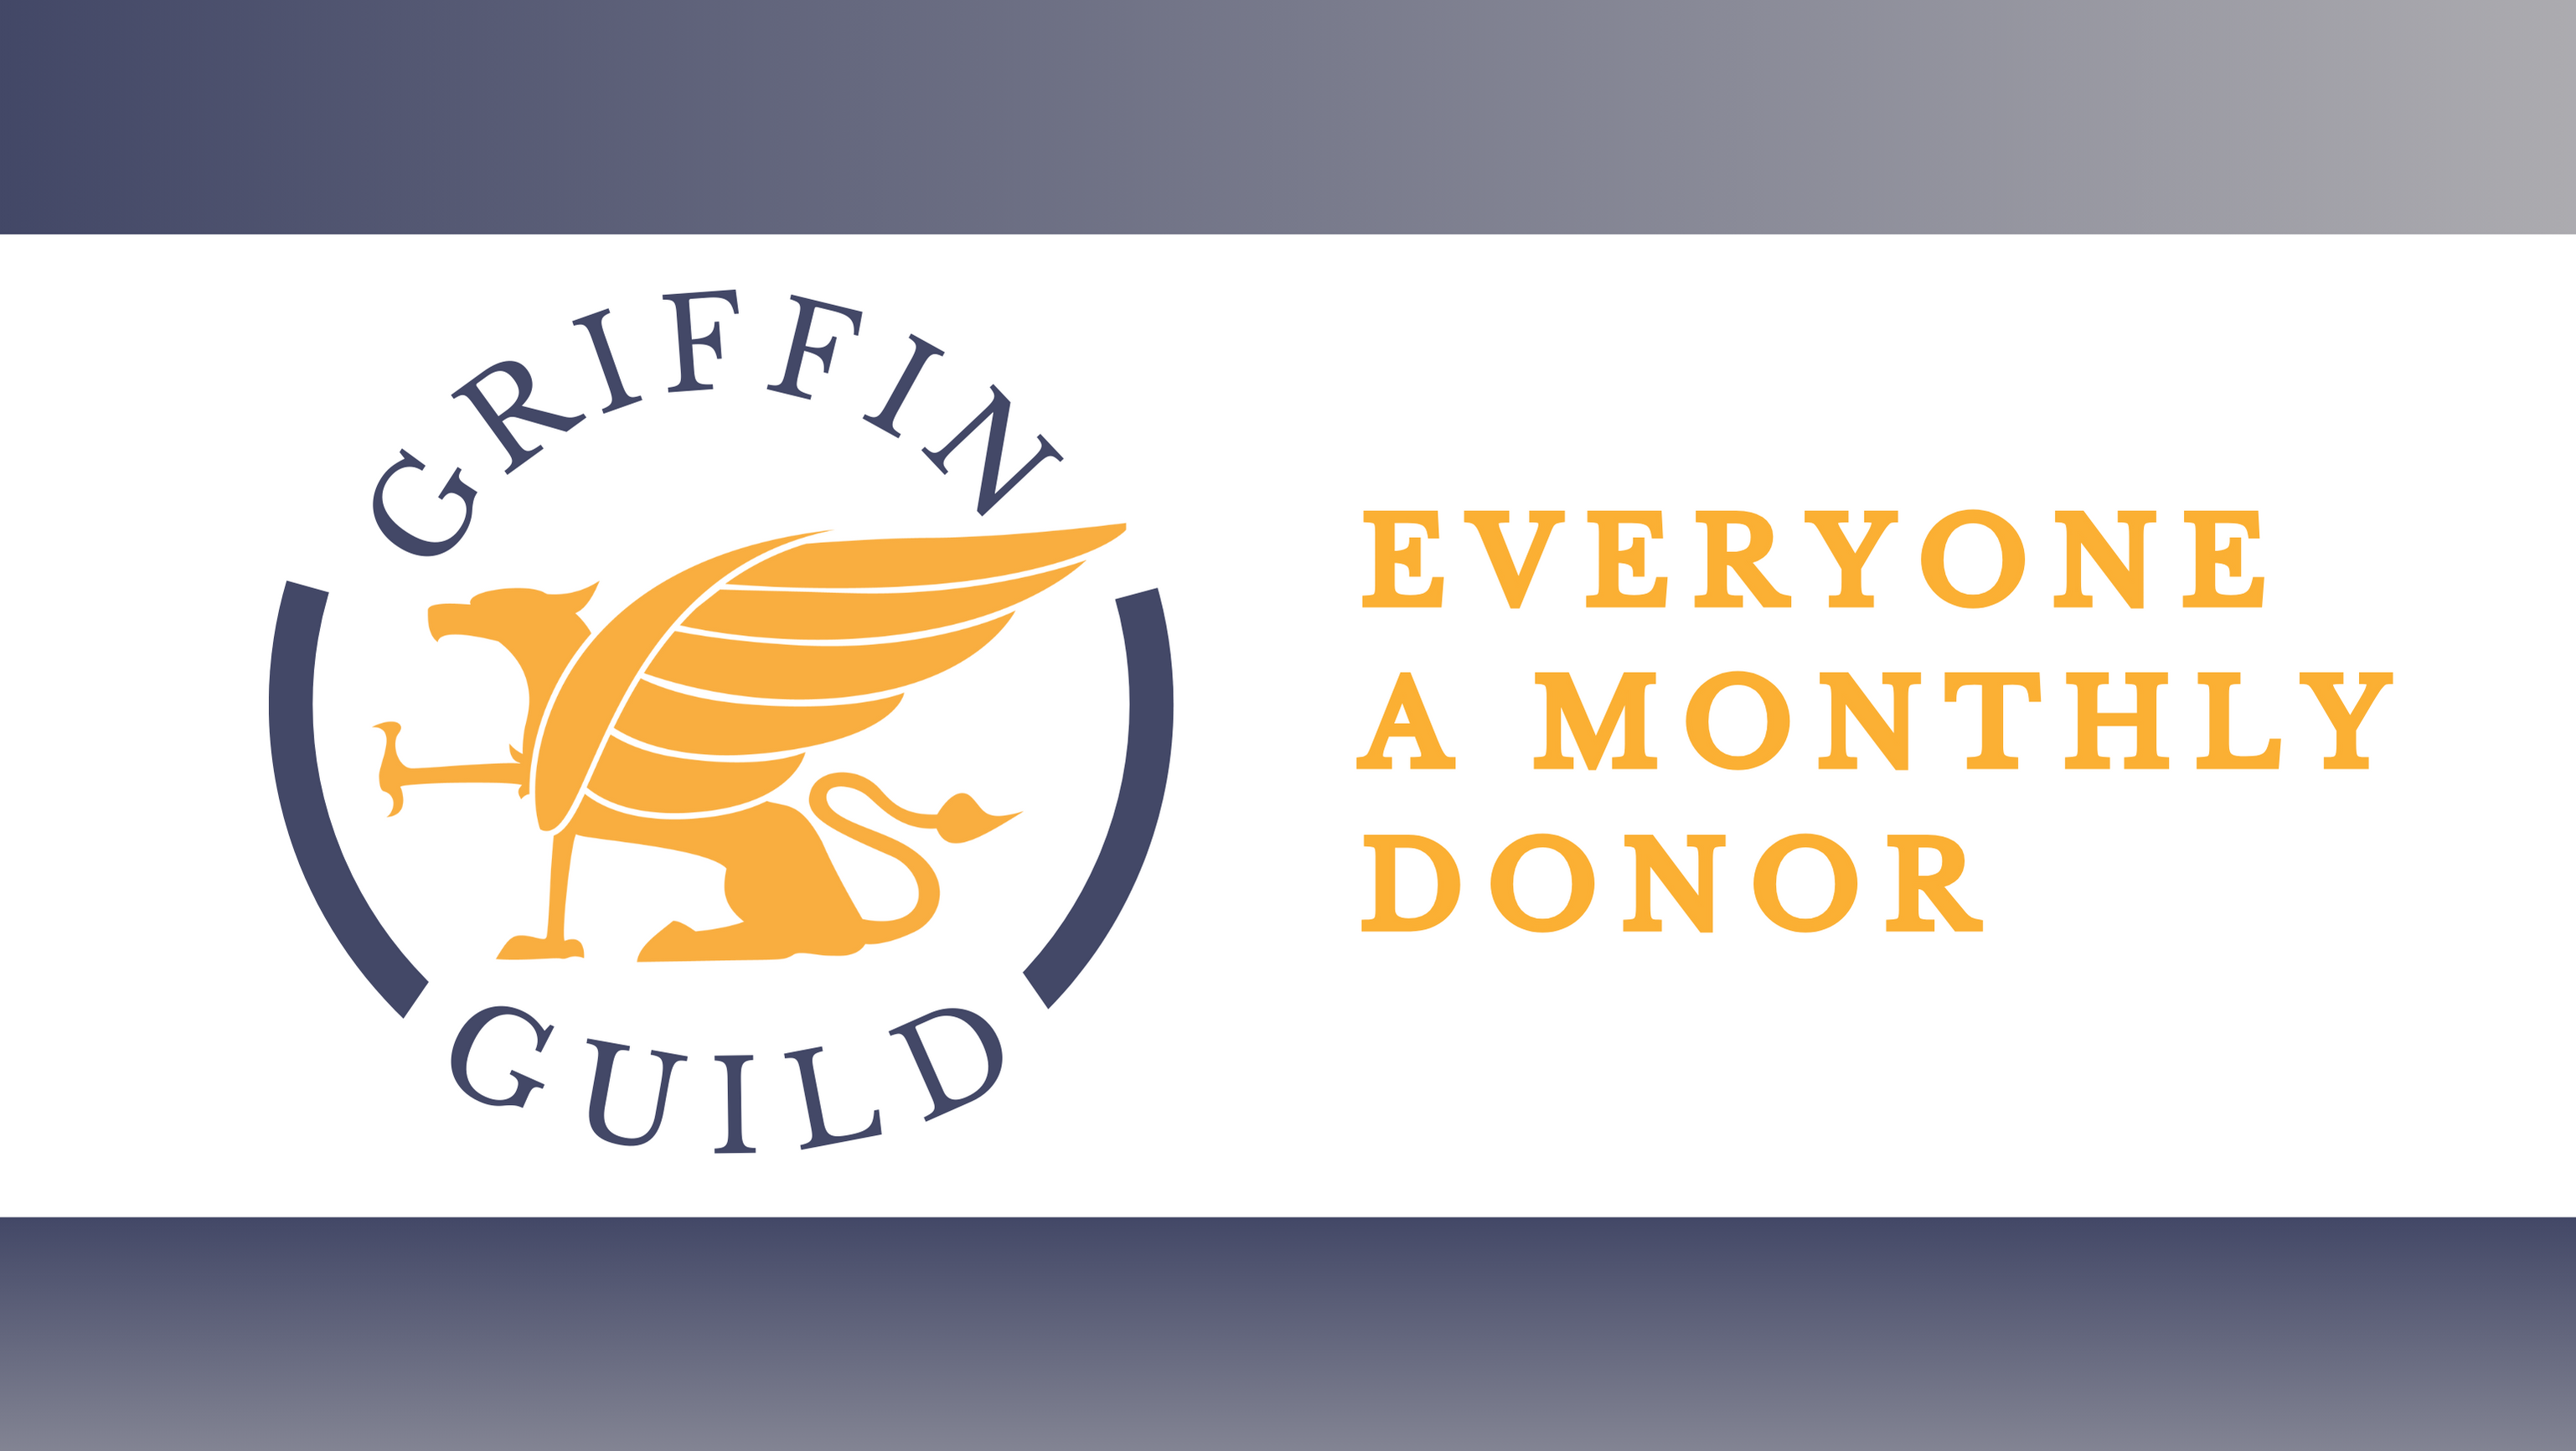 Make everyone a monthly donor